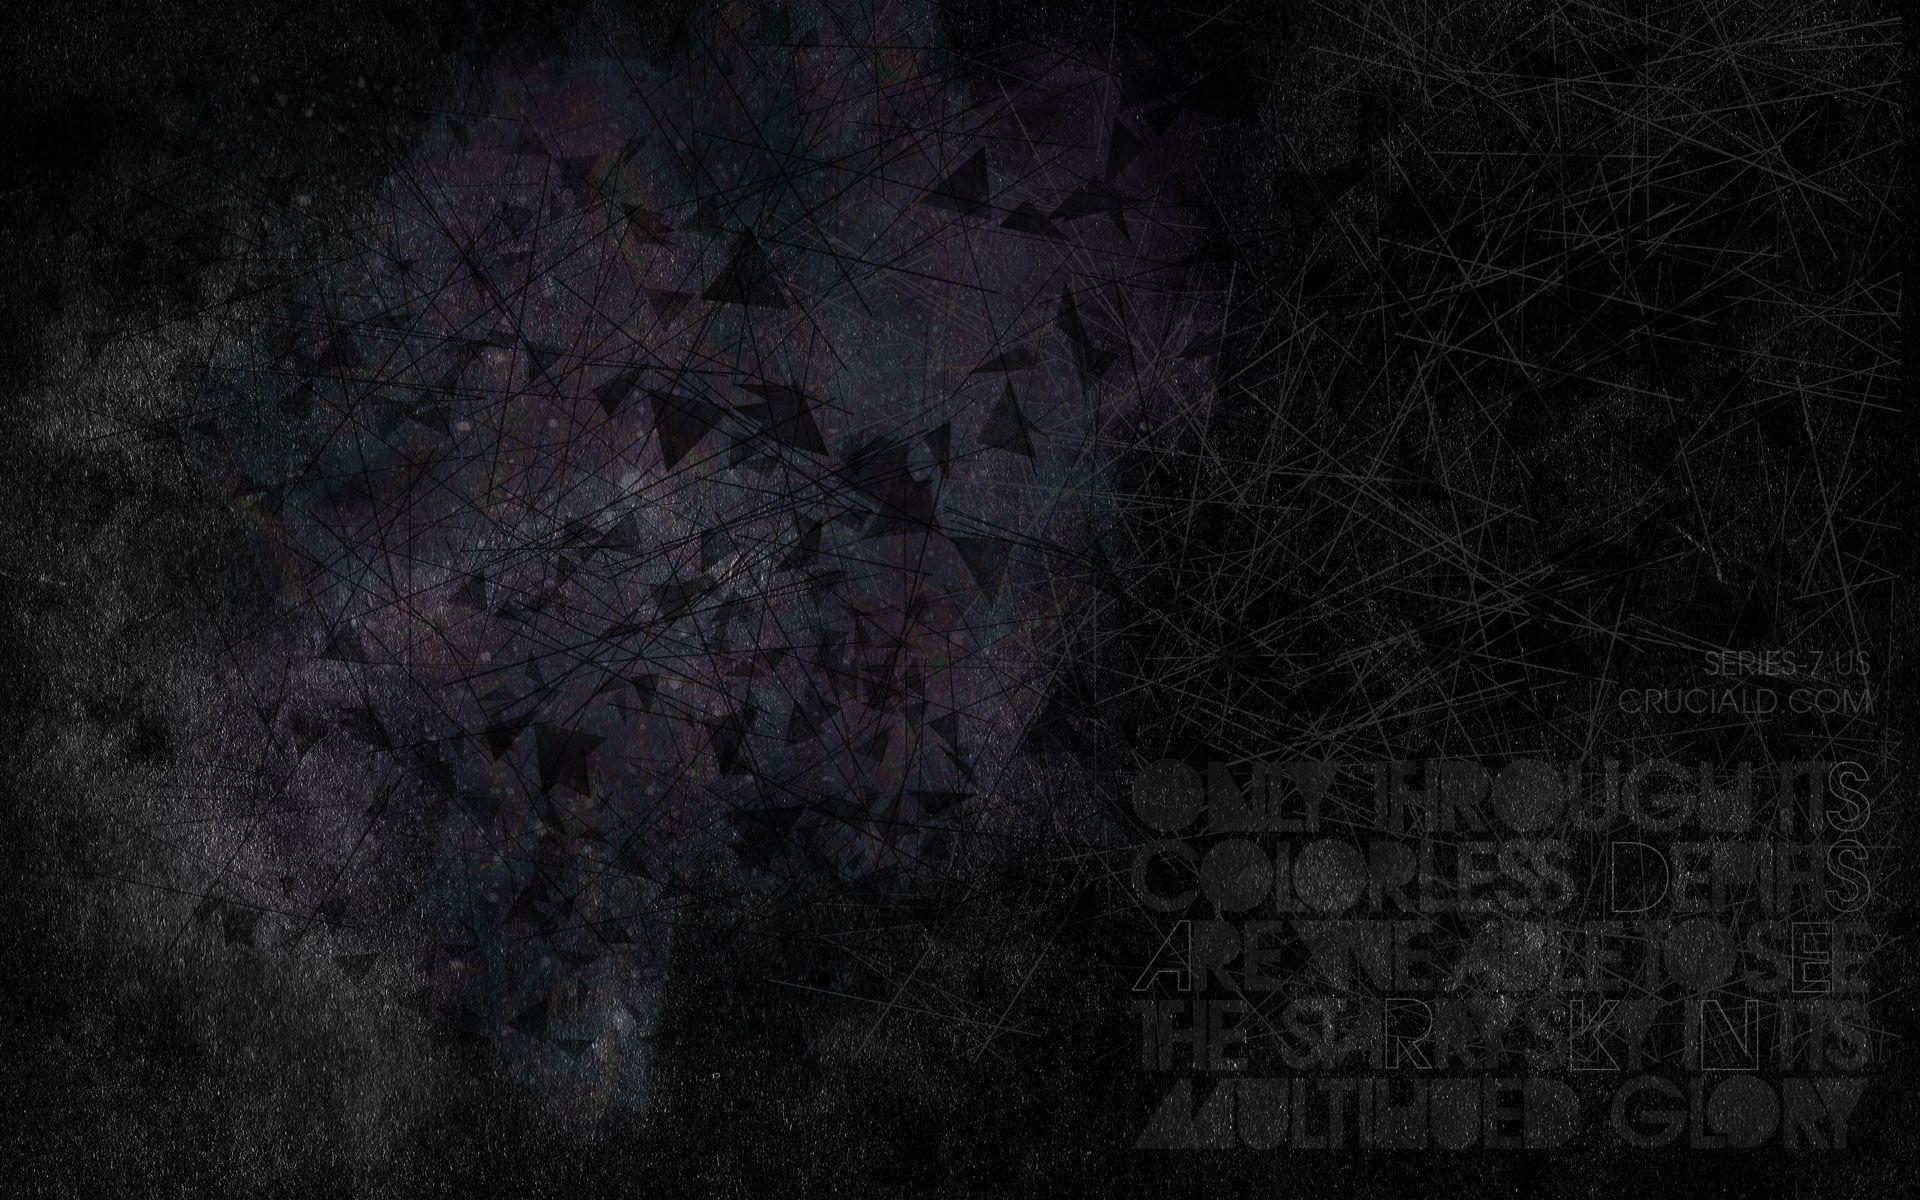 Darkness Poster and Wallpaper. Crucial Design Blog